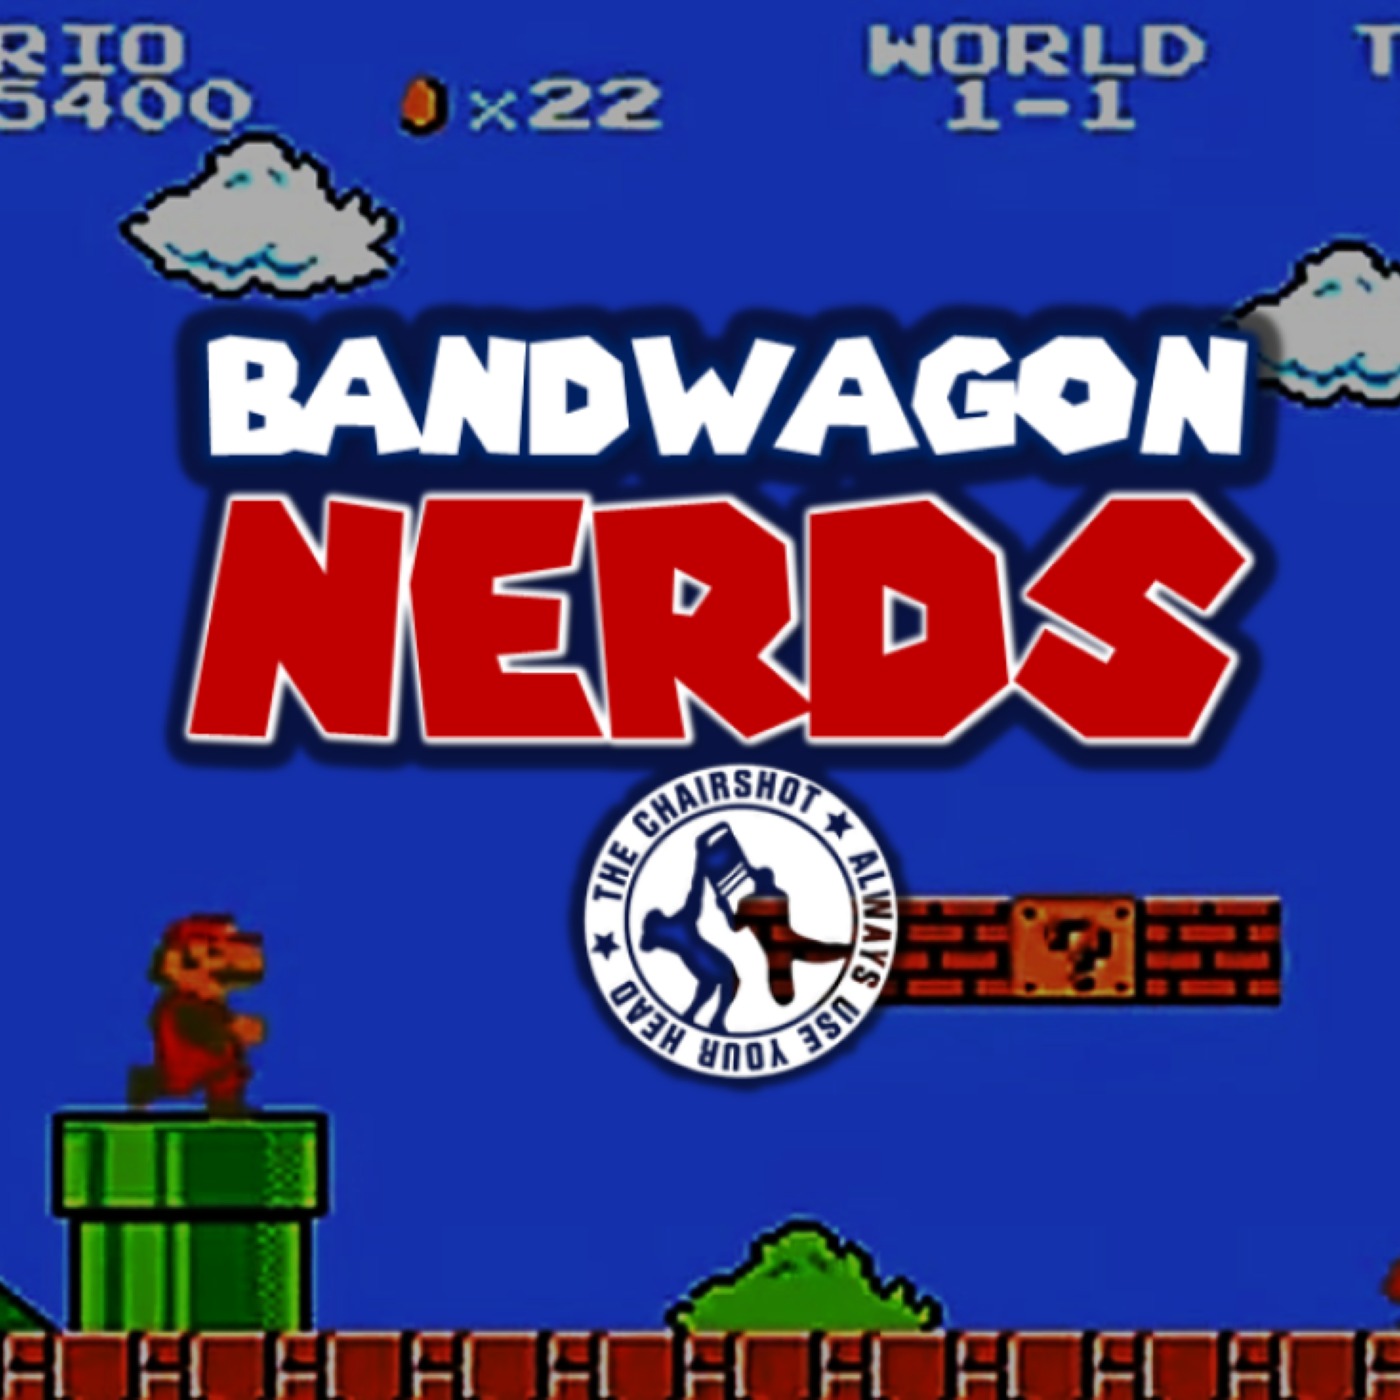 Bandwagon Nerds #222: Should It Stay or Should It Go?